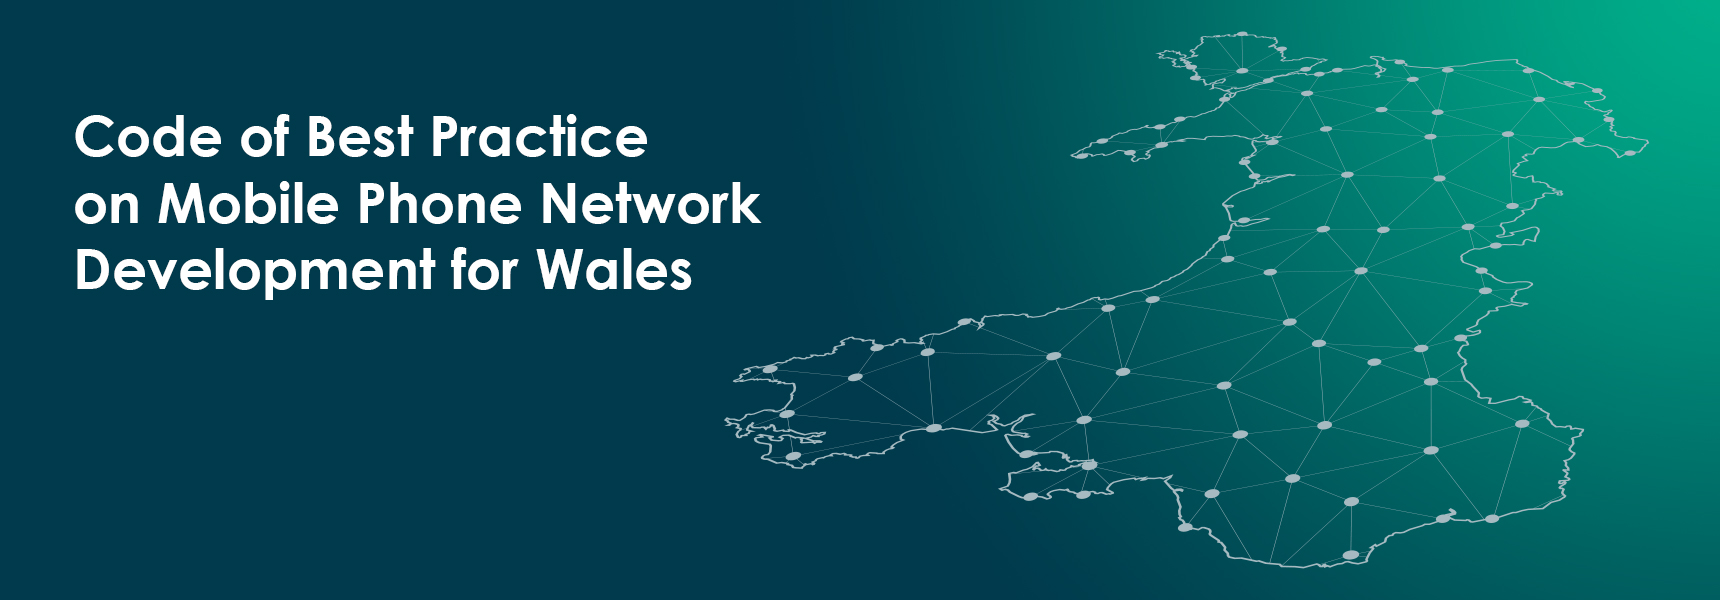 Code of Best Practice on Mobile Phone Network Development for Wales